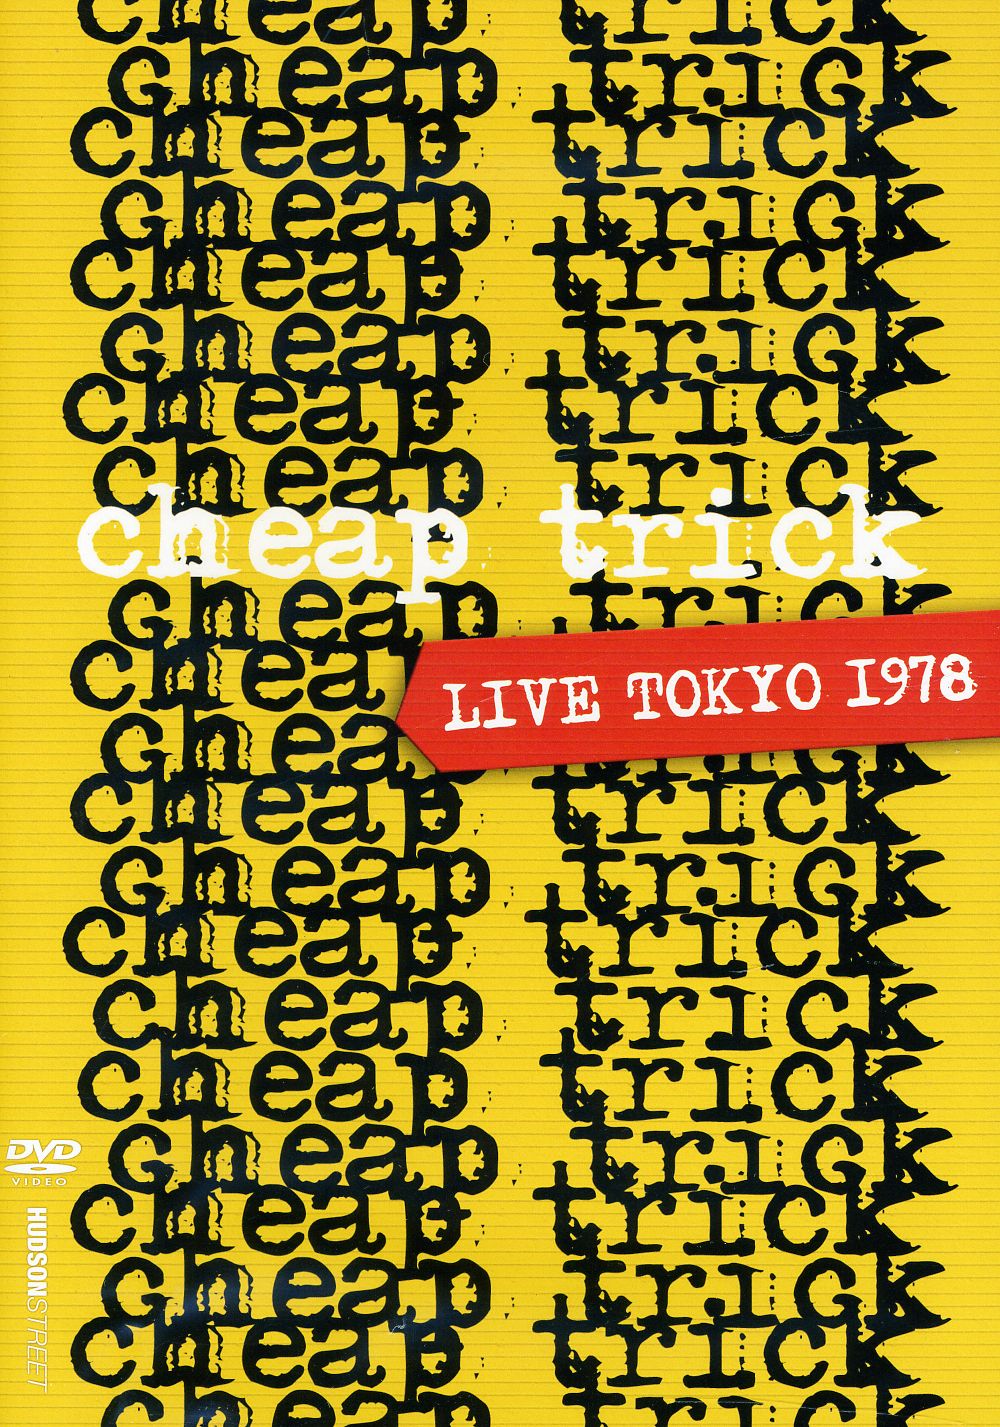 LIVE FROM TOYKO 1978 / (AMAR WS)